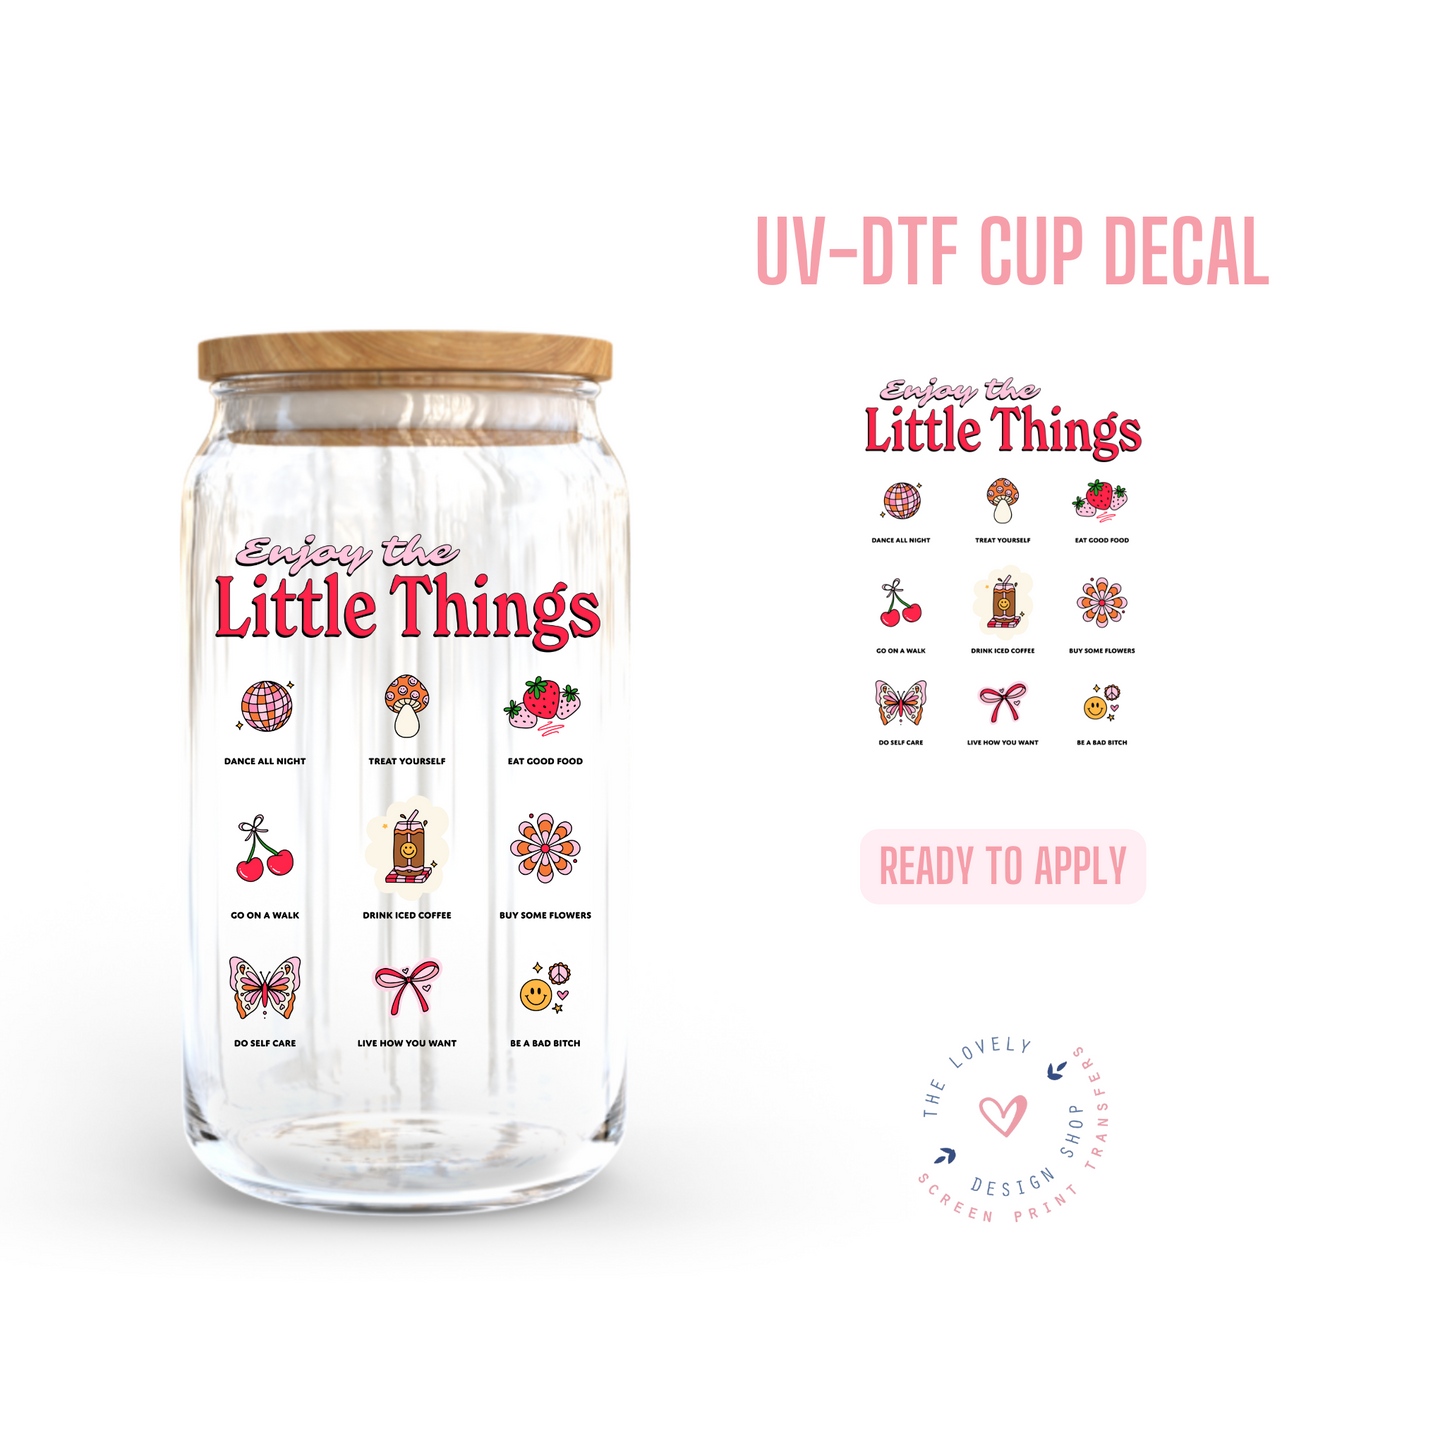 Enjoy The Little Things - UV DTF Cup Decal (Ready to Ship) Feb 27